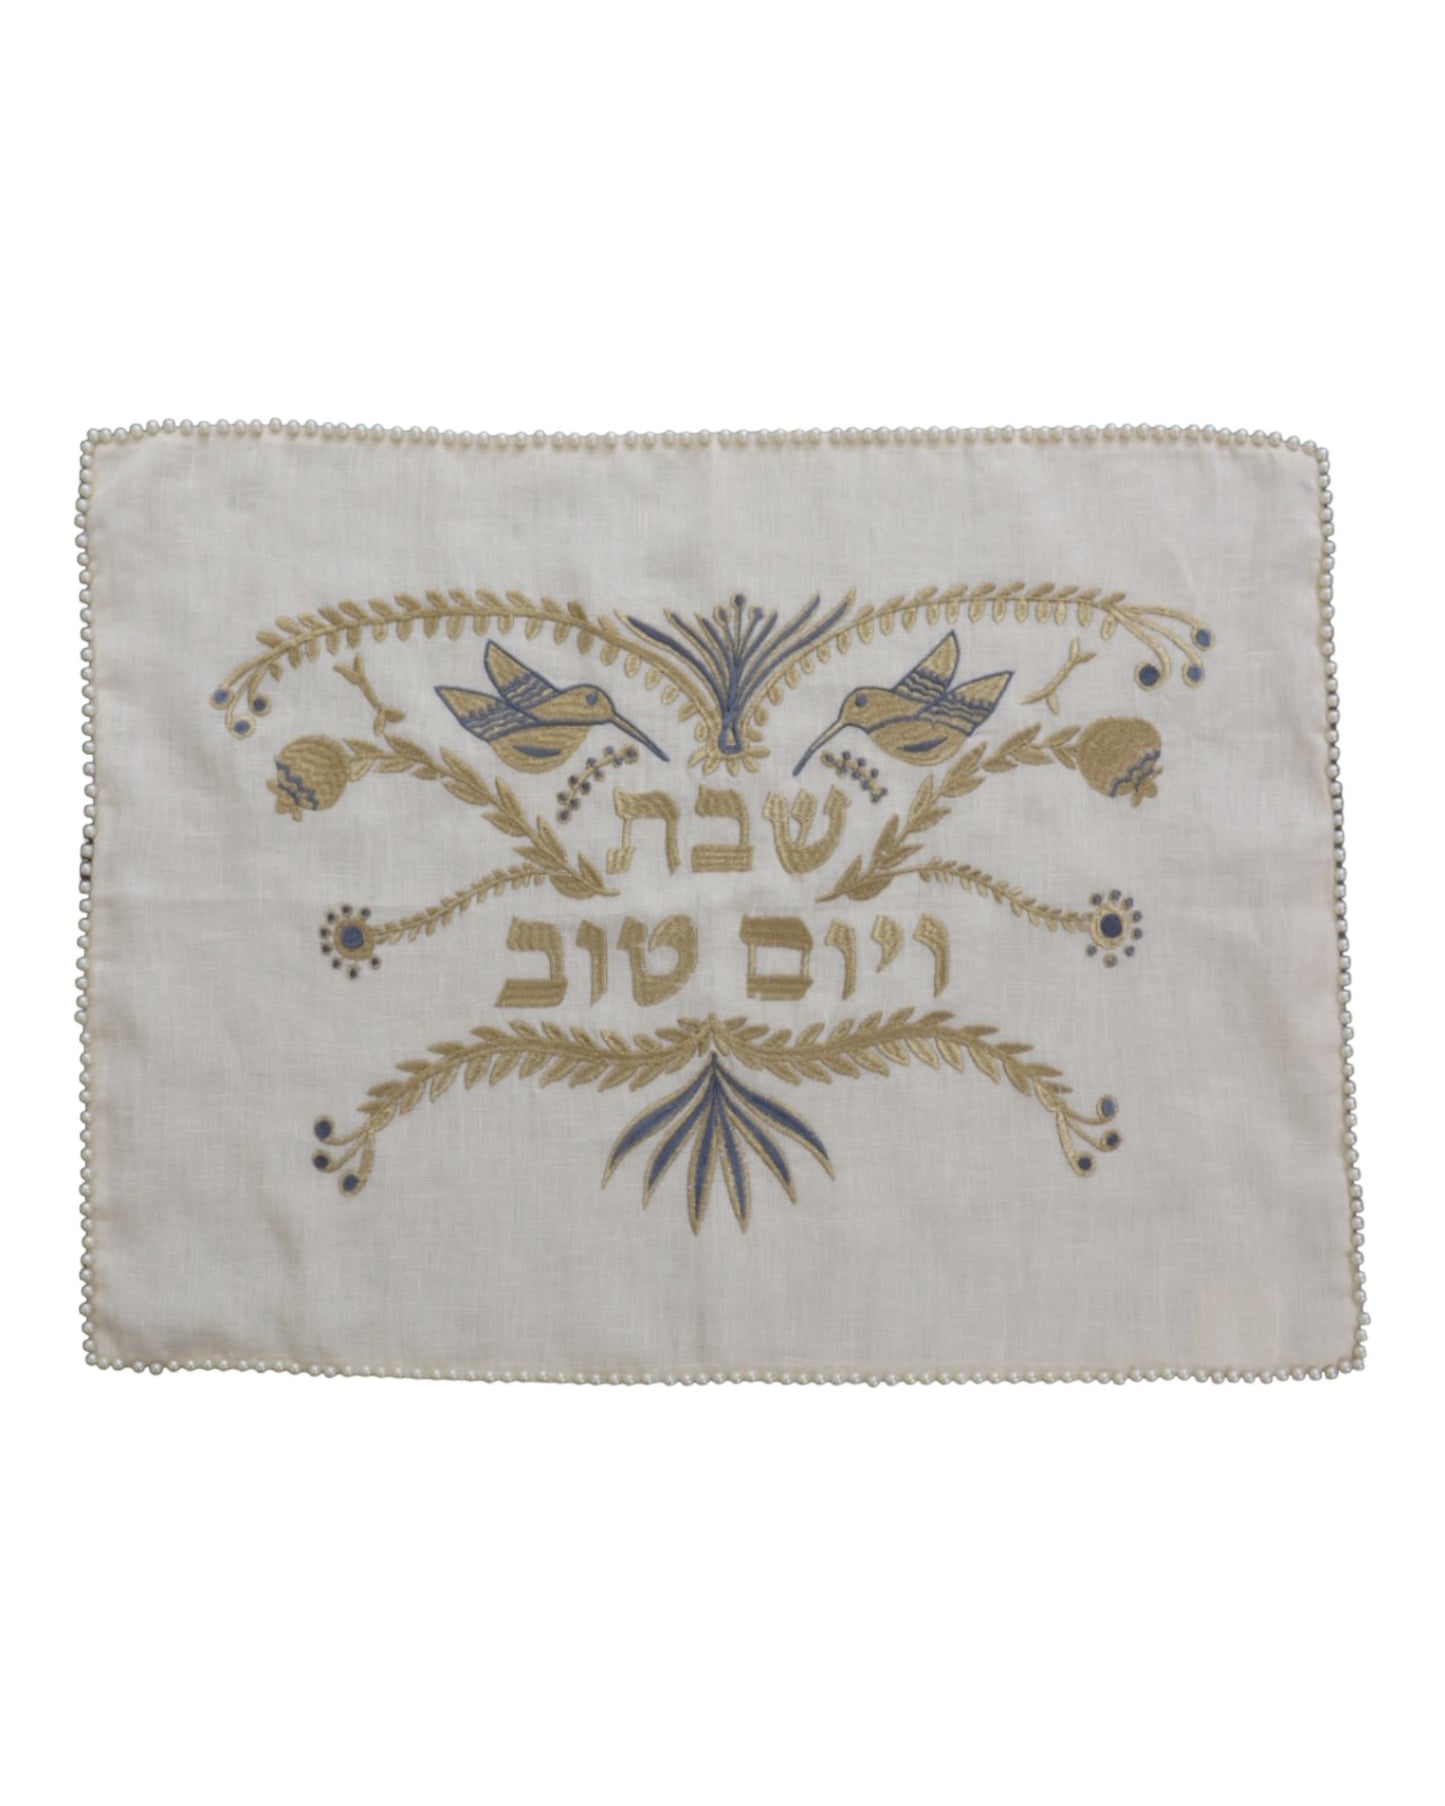 Gold embridery challah cover linen pearl embroidered yom tov judaica gifts 